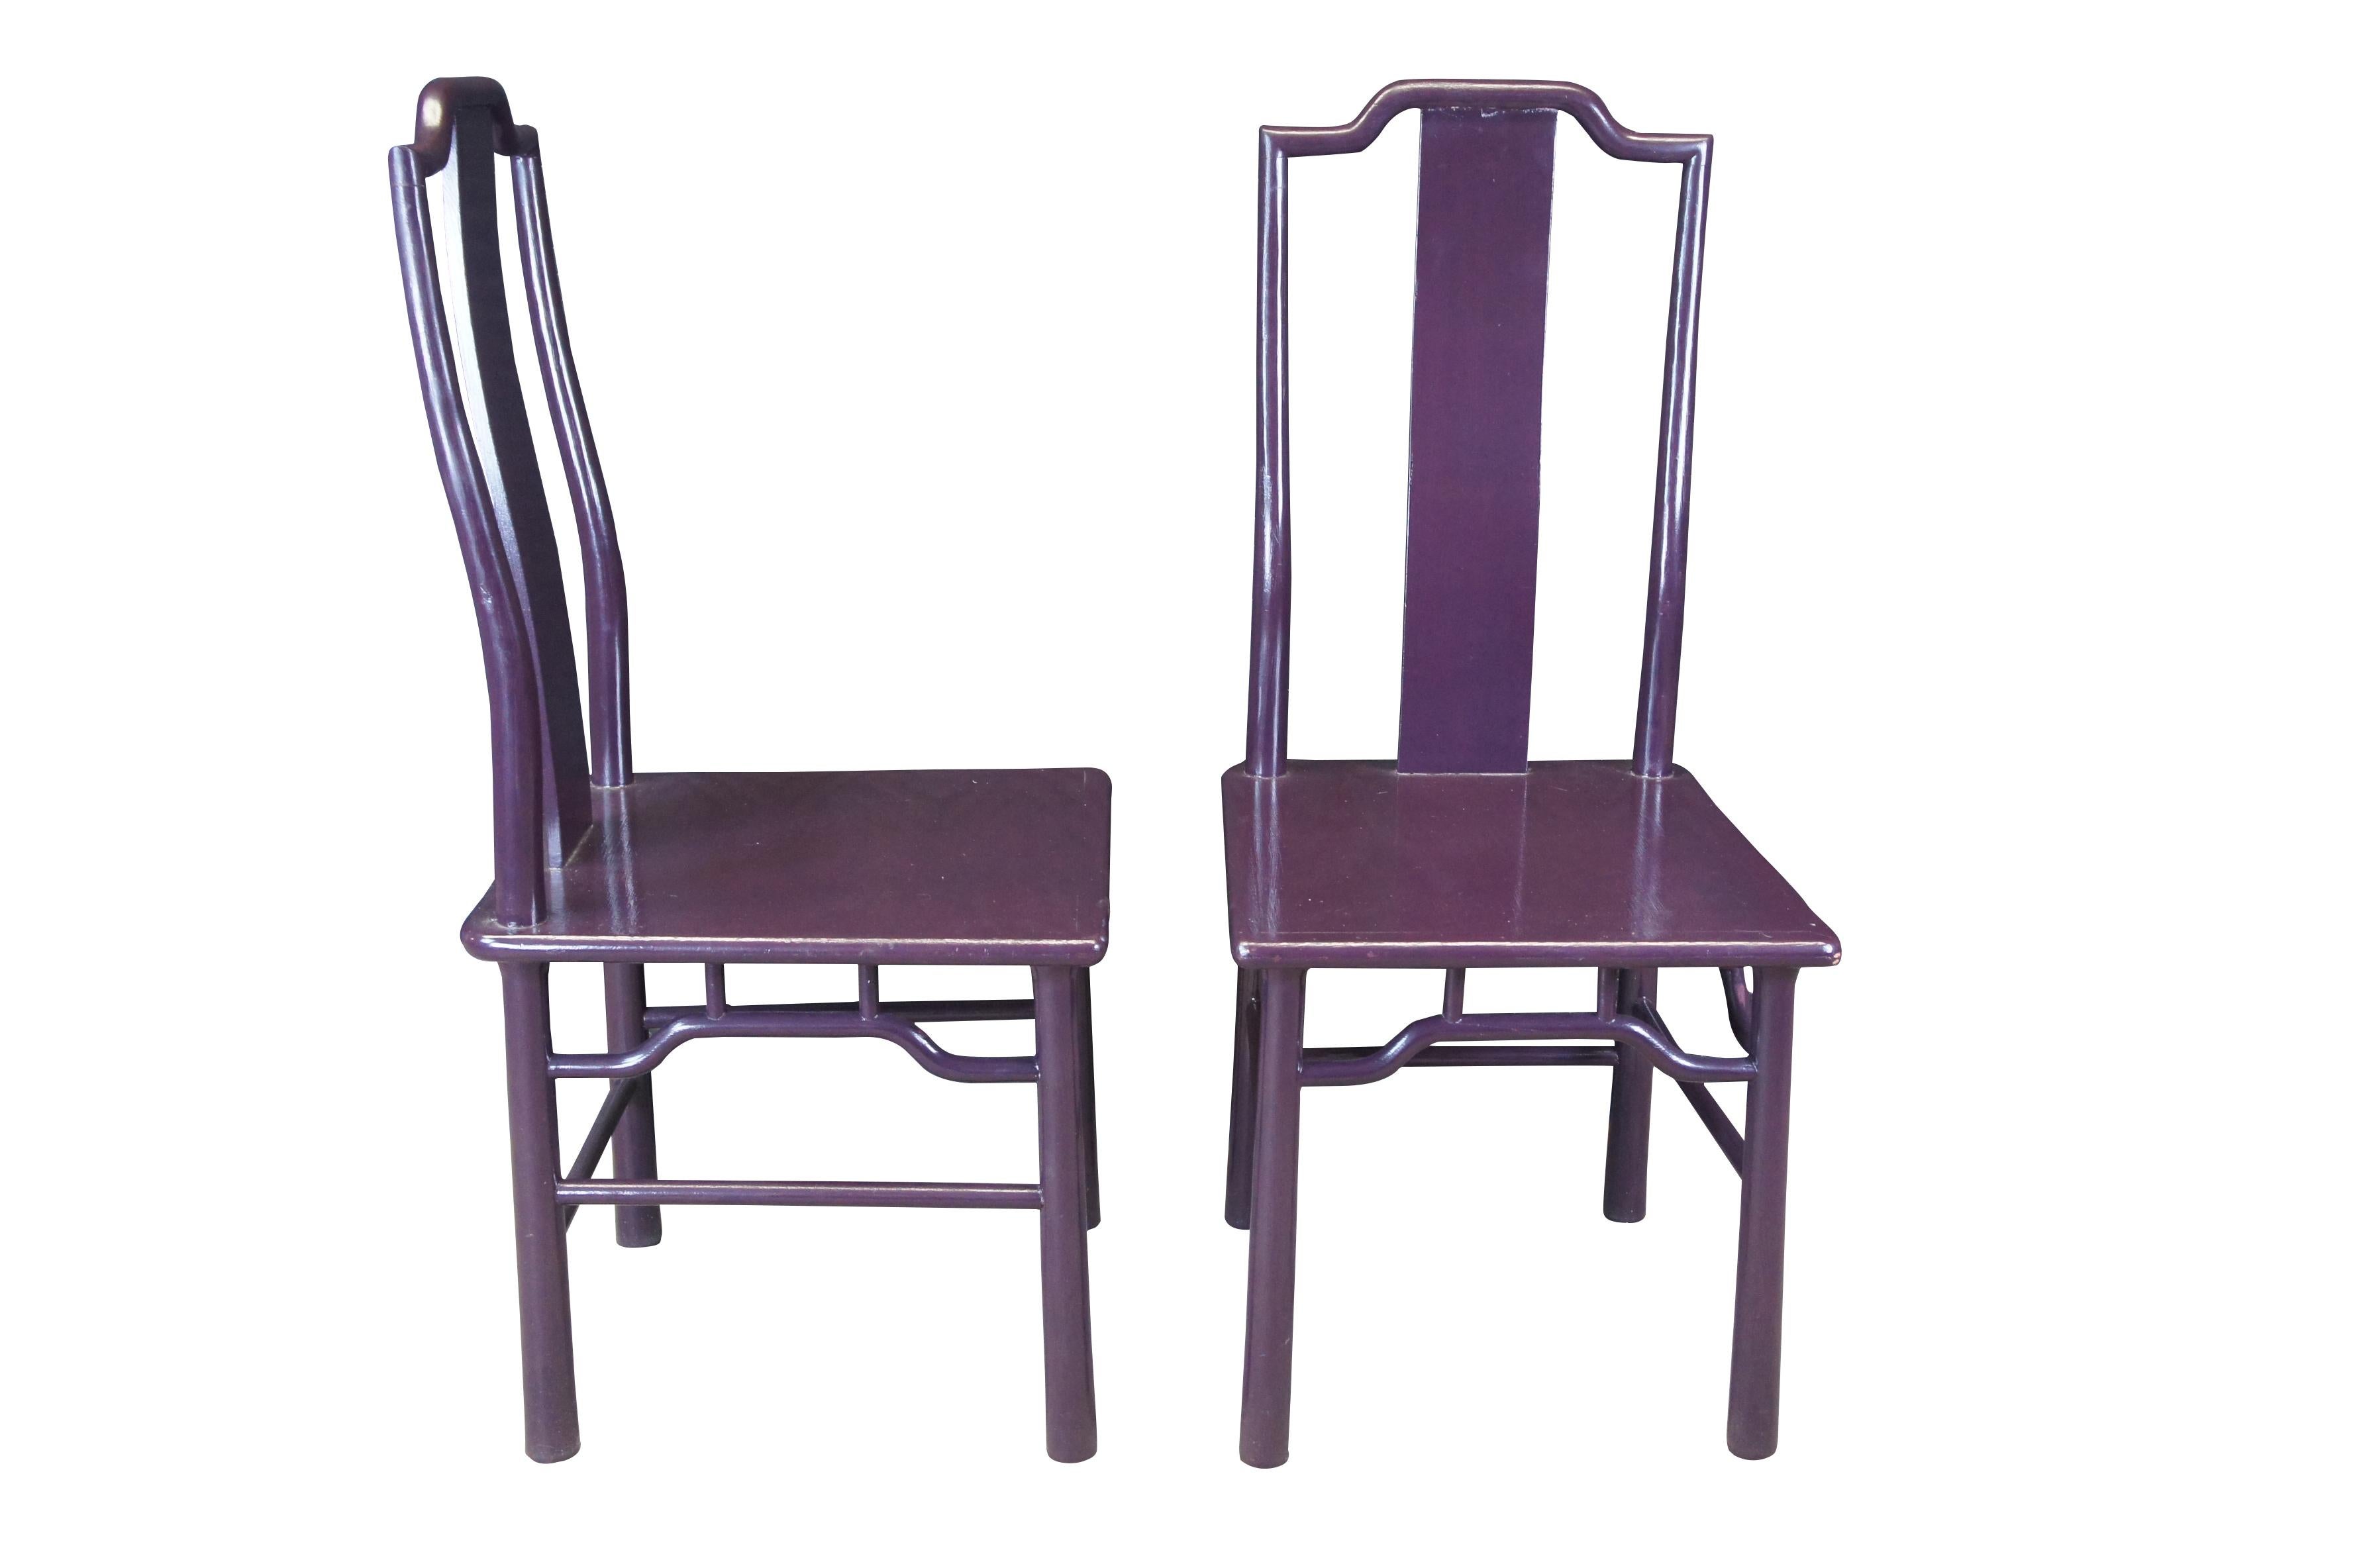 Two vintage Chinese Chinoiserie ming style side chairs featuring purple lacquer with slat backs.

Dimensions:
41.5